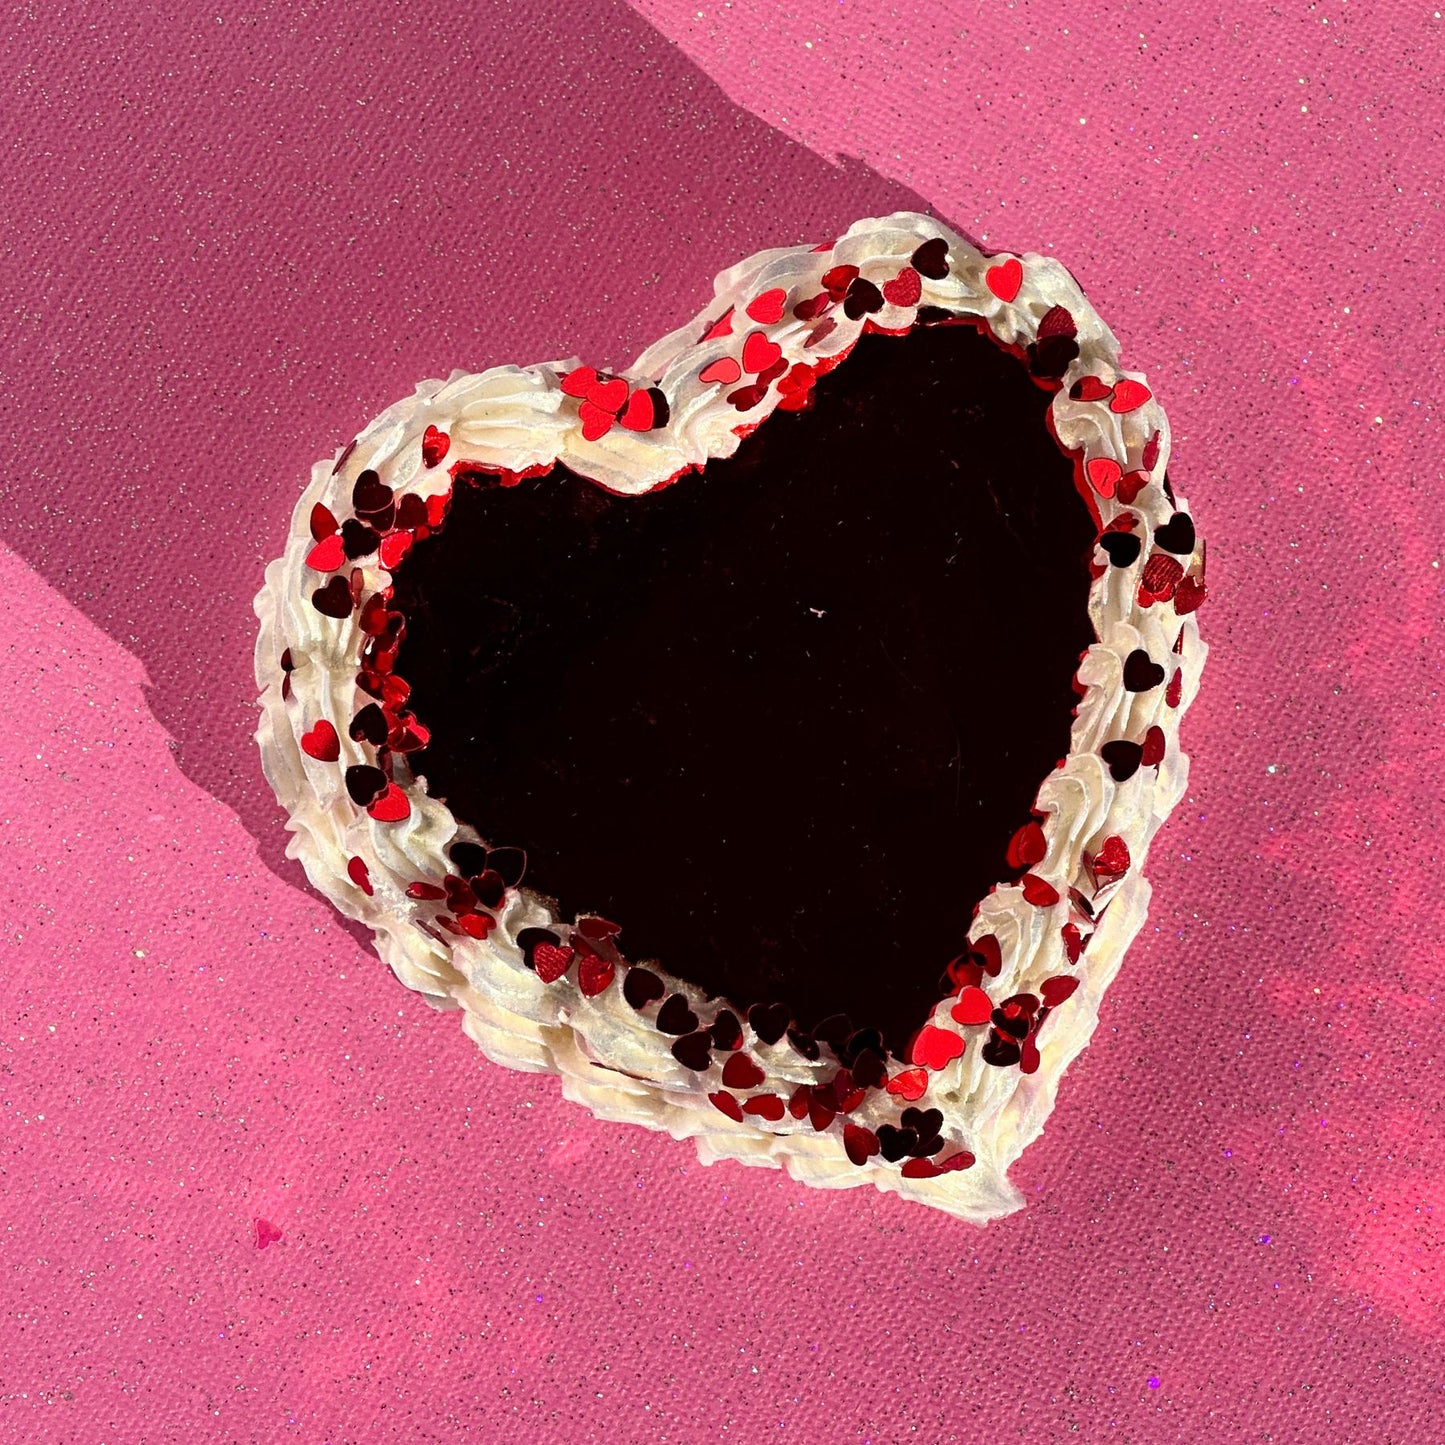 3D Painted Cake - Heart Box Red Metallic With Pearl "Frosting" and Red Heart Glitter